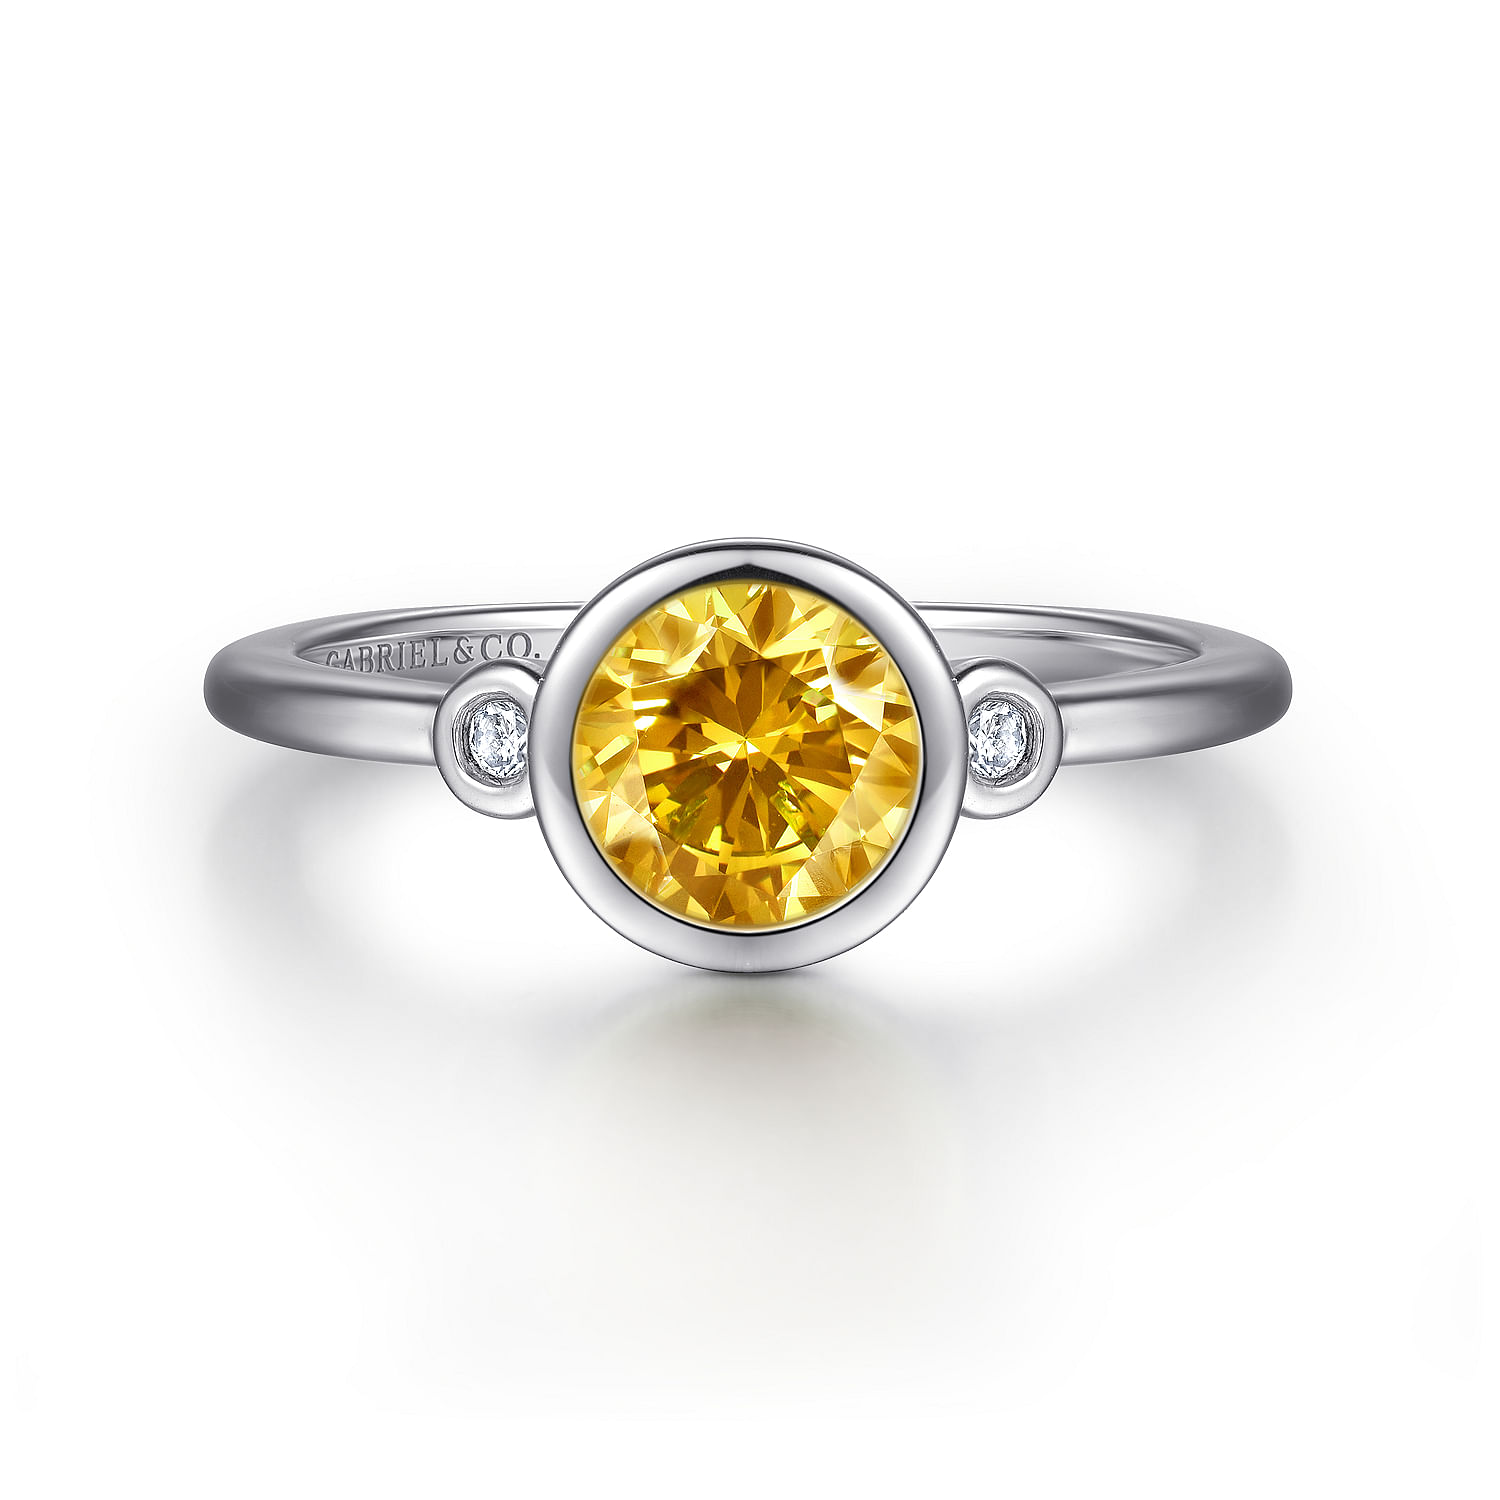 Details about    GTL Certified 925 Silver Natural Gemstone Engagement Ring Citrine Ring